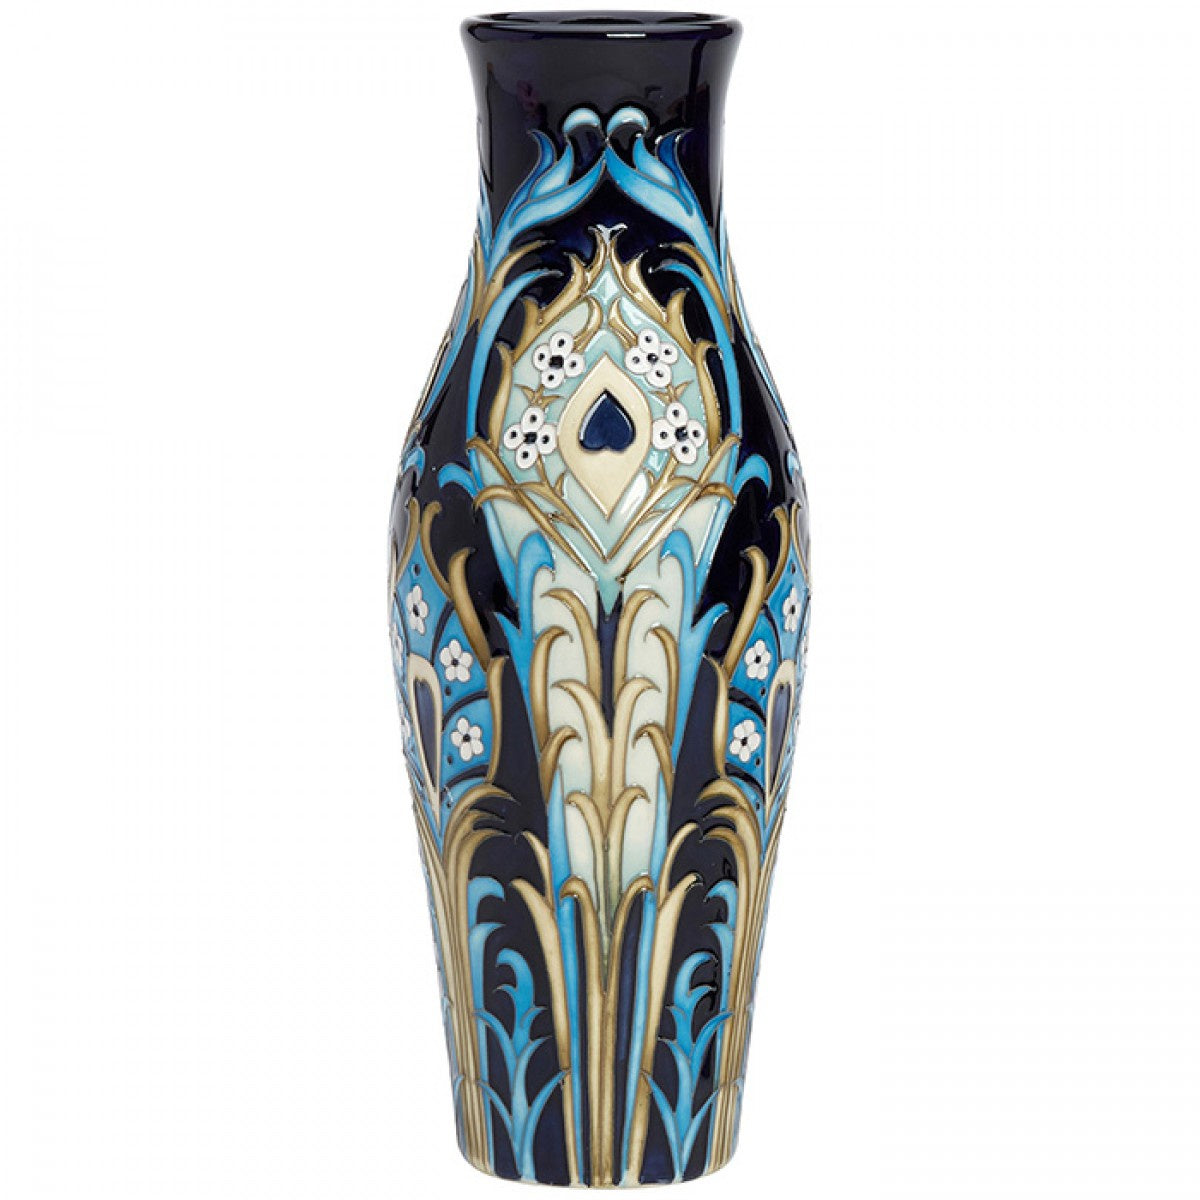 Florian Feather Vase 120/9 Numbered Edition